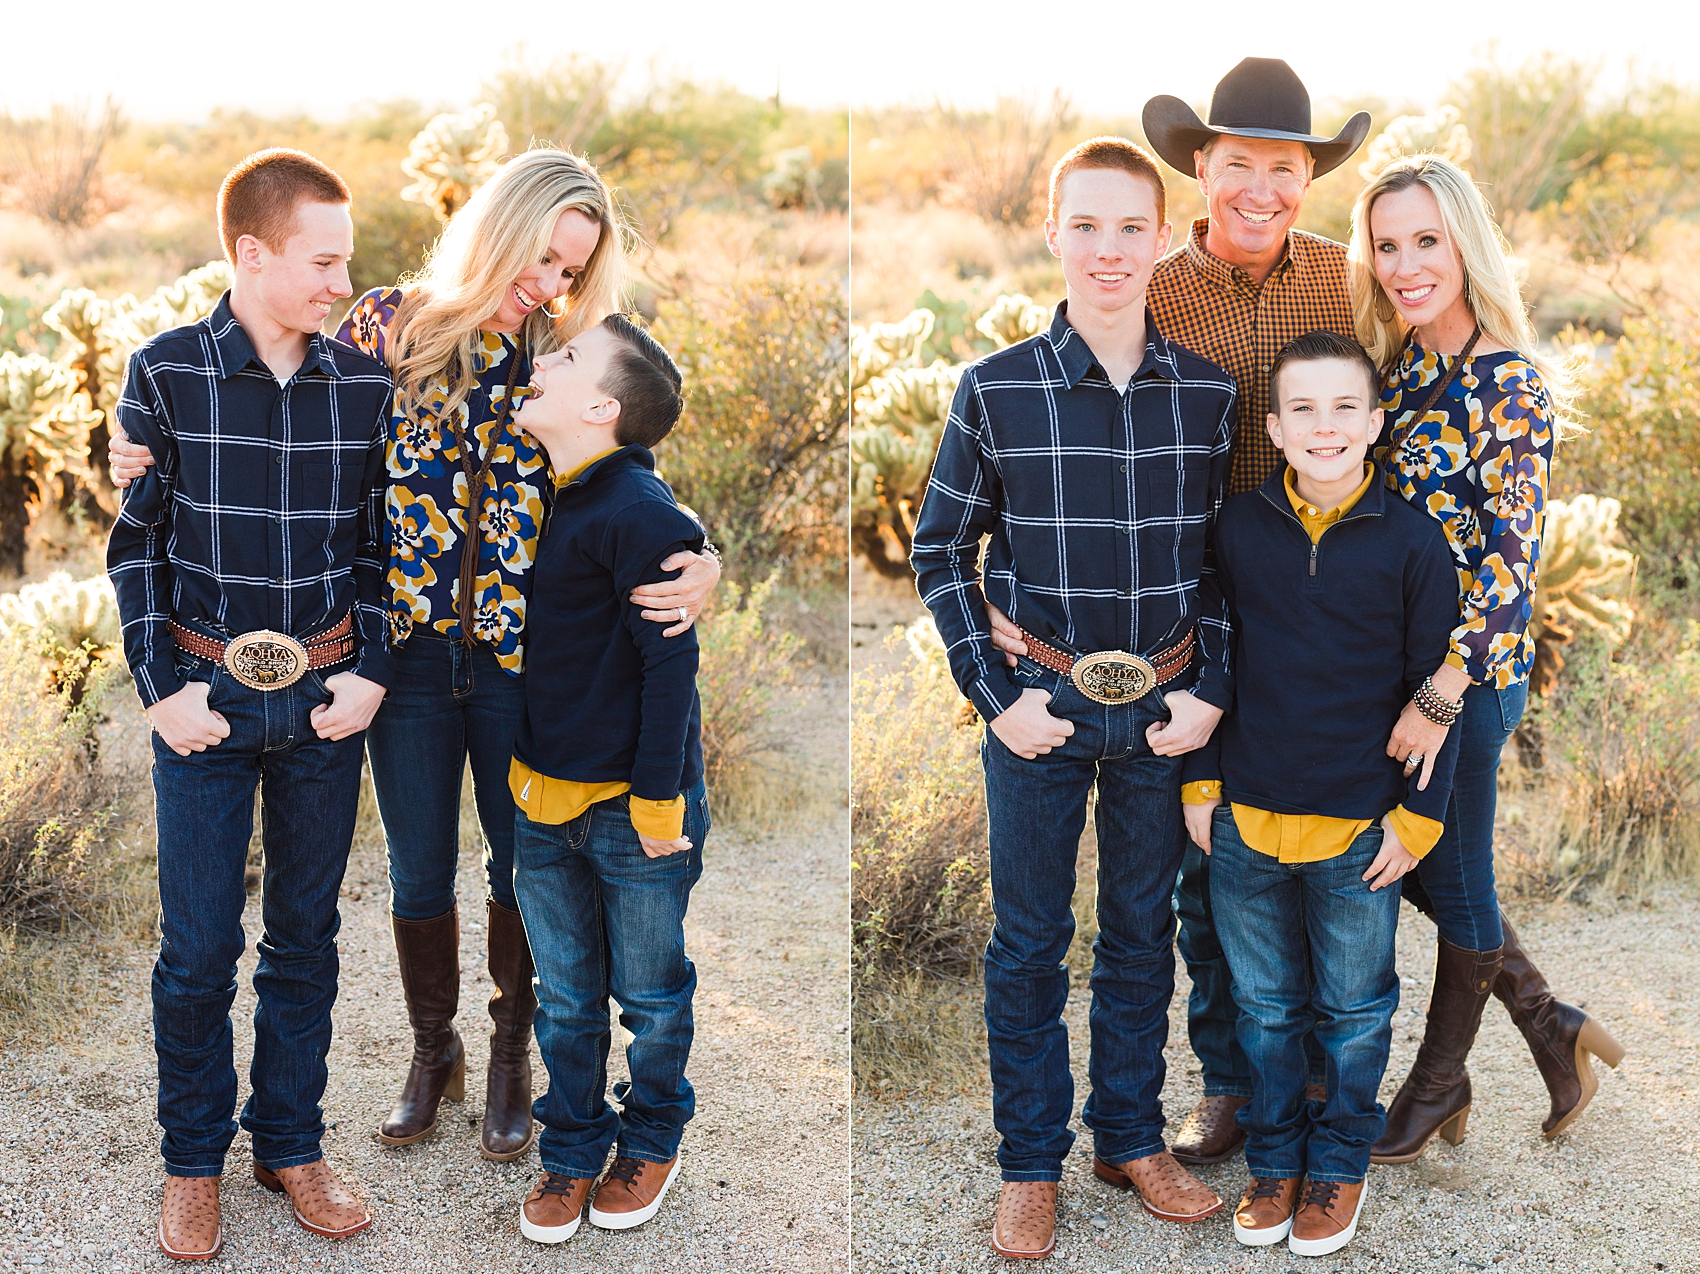 Leah Hope Photography | Scottsdale Phoenix Arizona | Desert Landscape Cactus Scenery | Cowboy Family Pictures | What to Wear | Family Poses